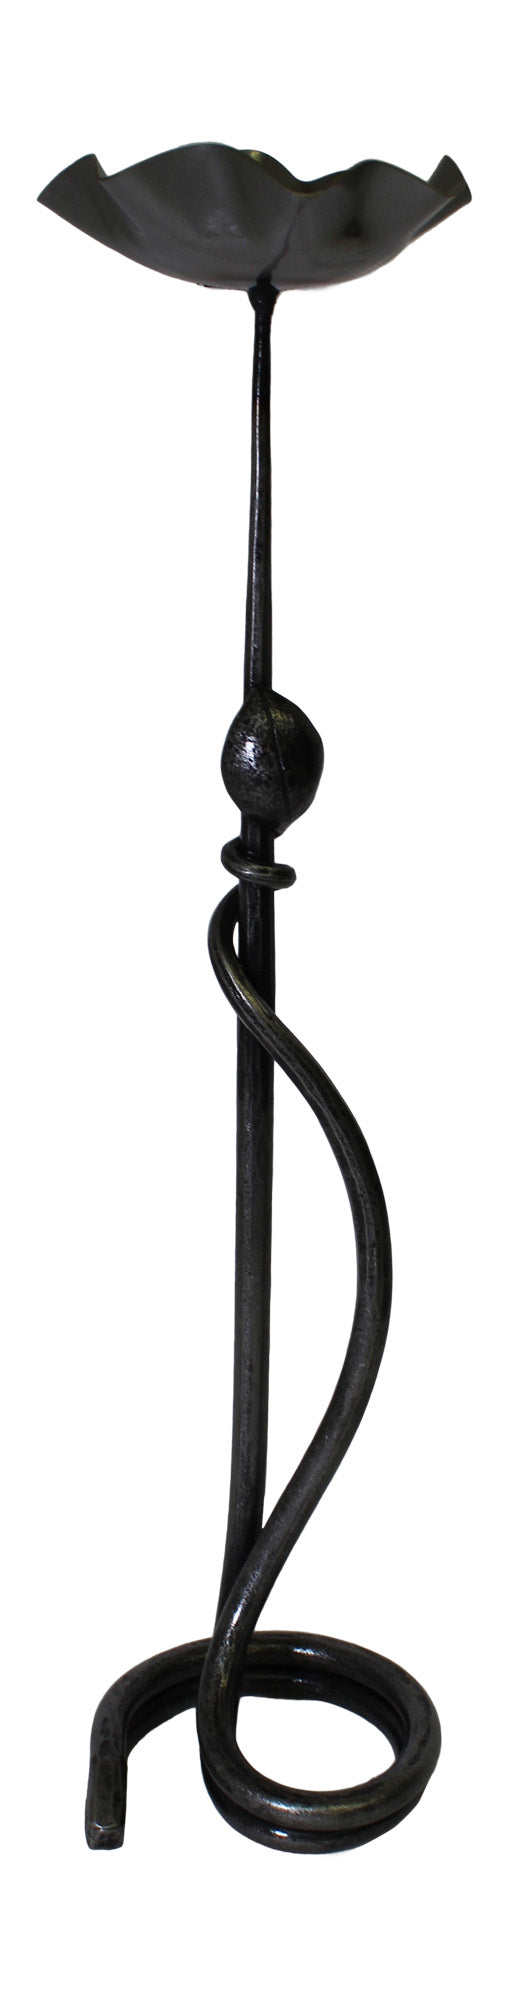 Stunning Belltrees Forge Wrought Iron Double Round With Leaf Candle Holder